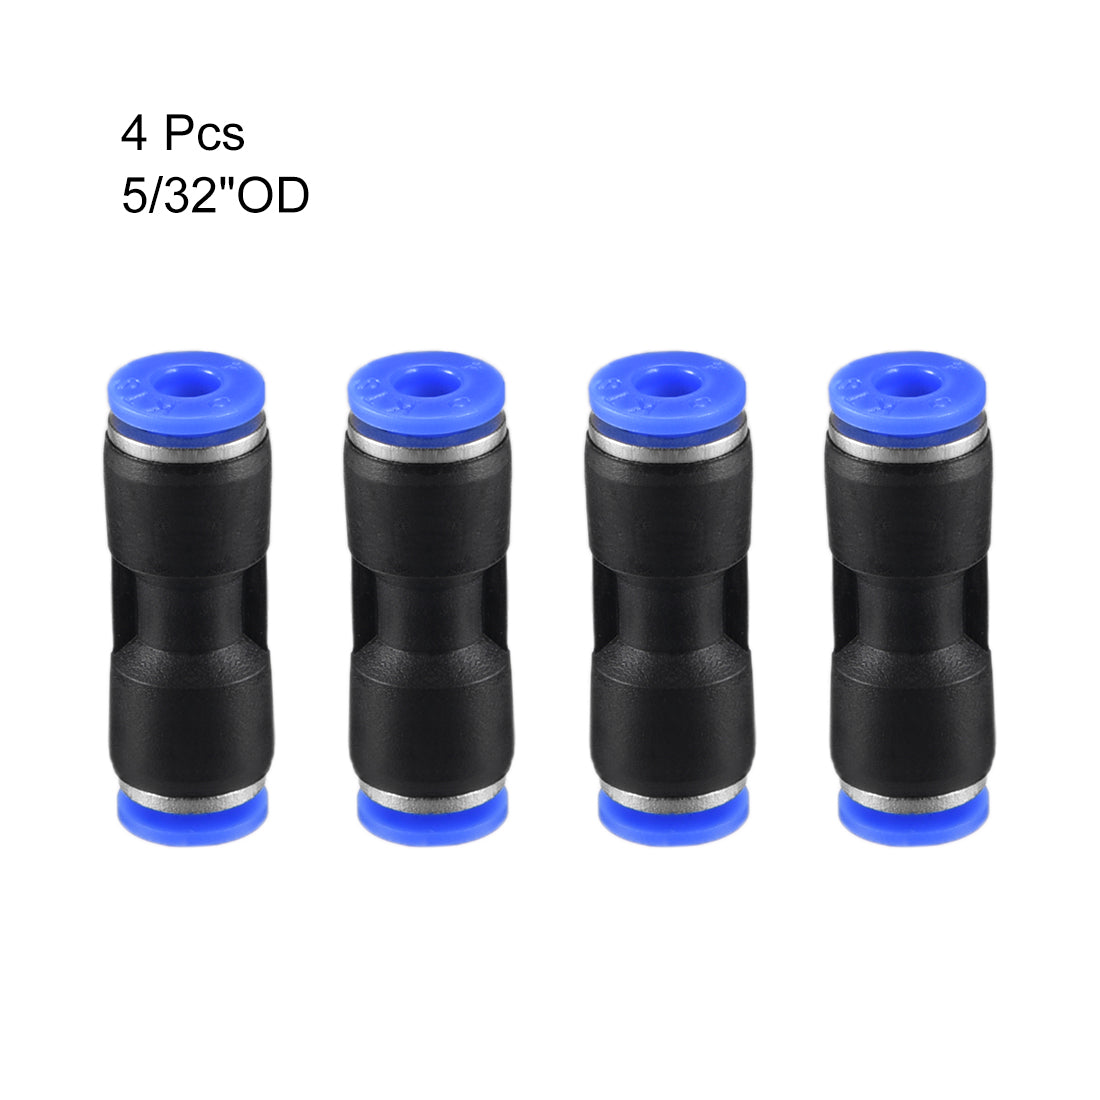 uxcell Uxcell 4pcs Push to Connect Fittings Tube Connect  4mm or 5/32" Straight OD Push Fit Fittings Tube Fittings Push Lock Blue